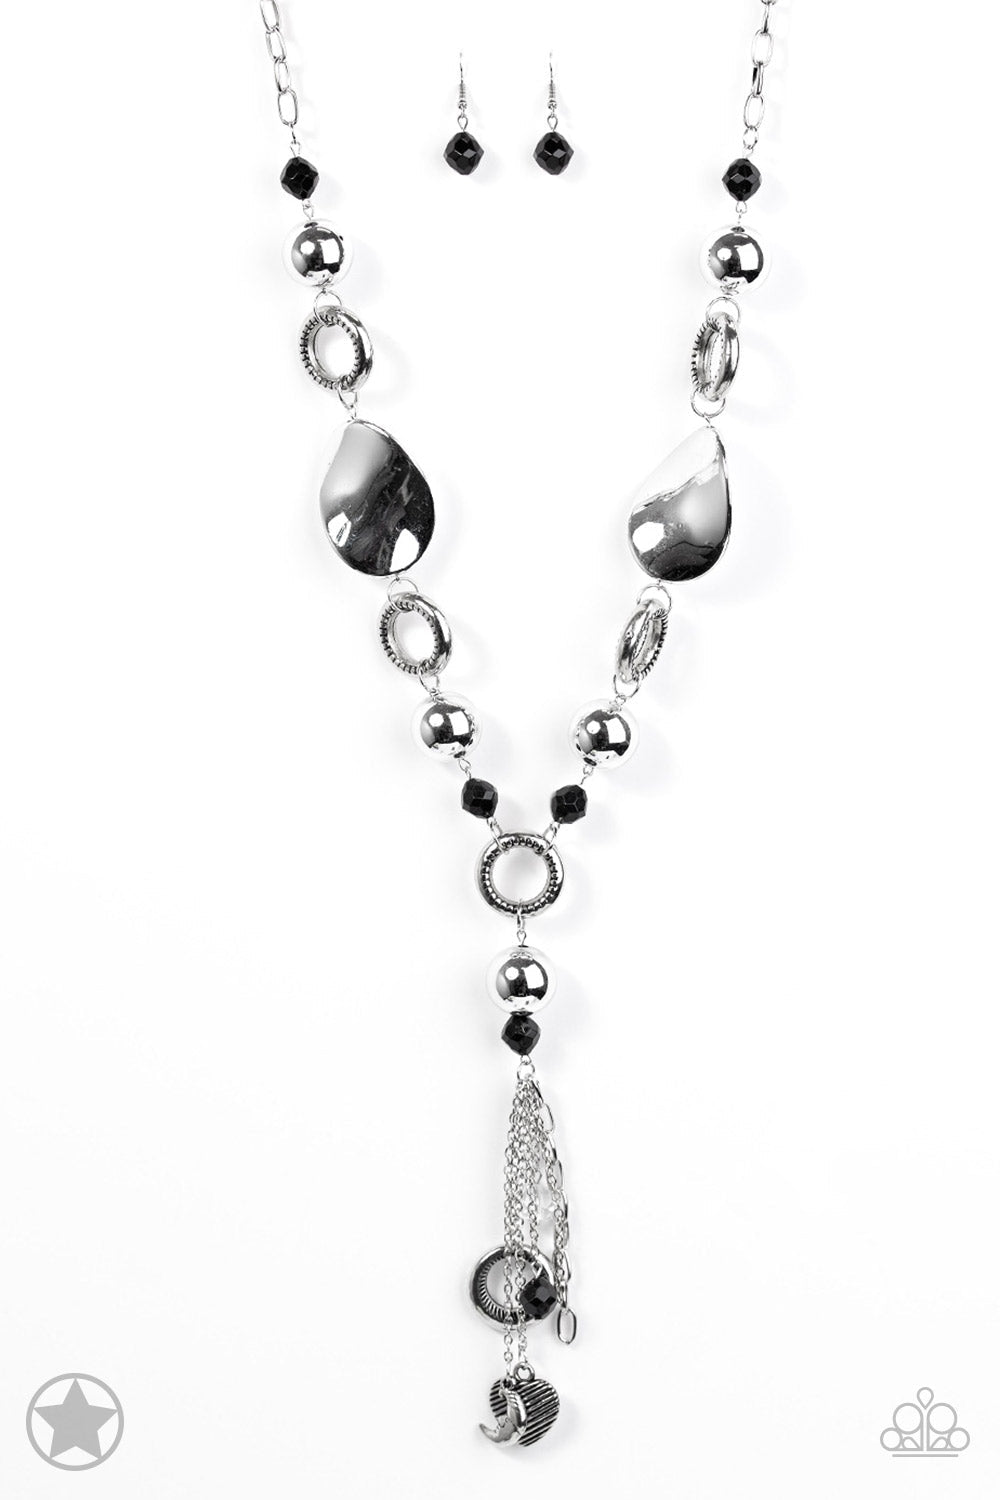 Total Eclipse Of the Heart - Silver and Black Fashion Necklace - Paparazzi Accessories - Long chain of black crystalized beads, curved plates of silver with a pearly finish, and chunky silver rings lead down to a tassel of chains and charms, including a crescent moon and a heart.